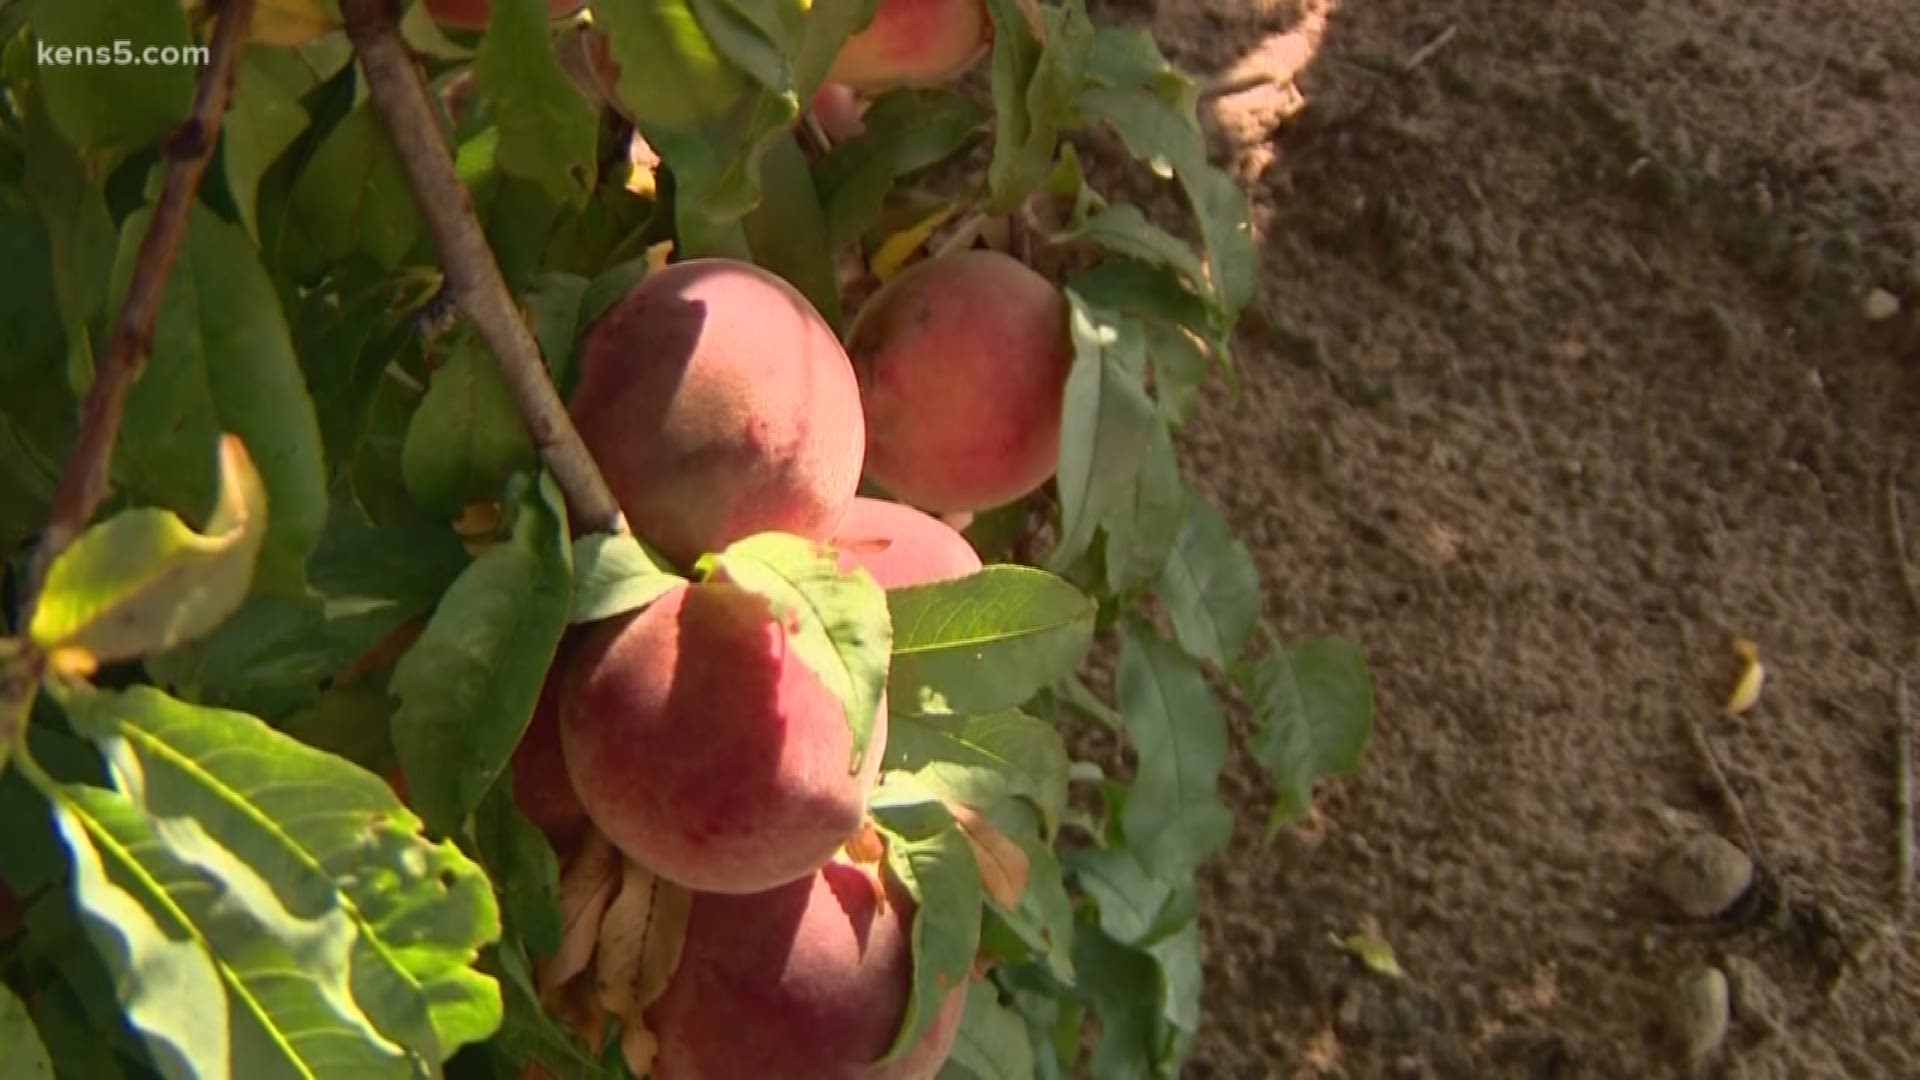 KENS 5's Barry Davis explores the peach industry in this week's Texas Outdoors.